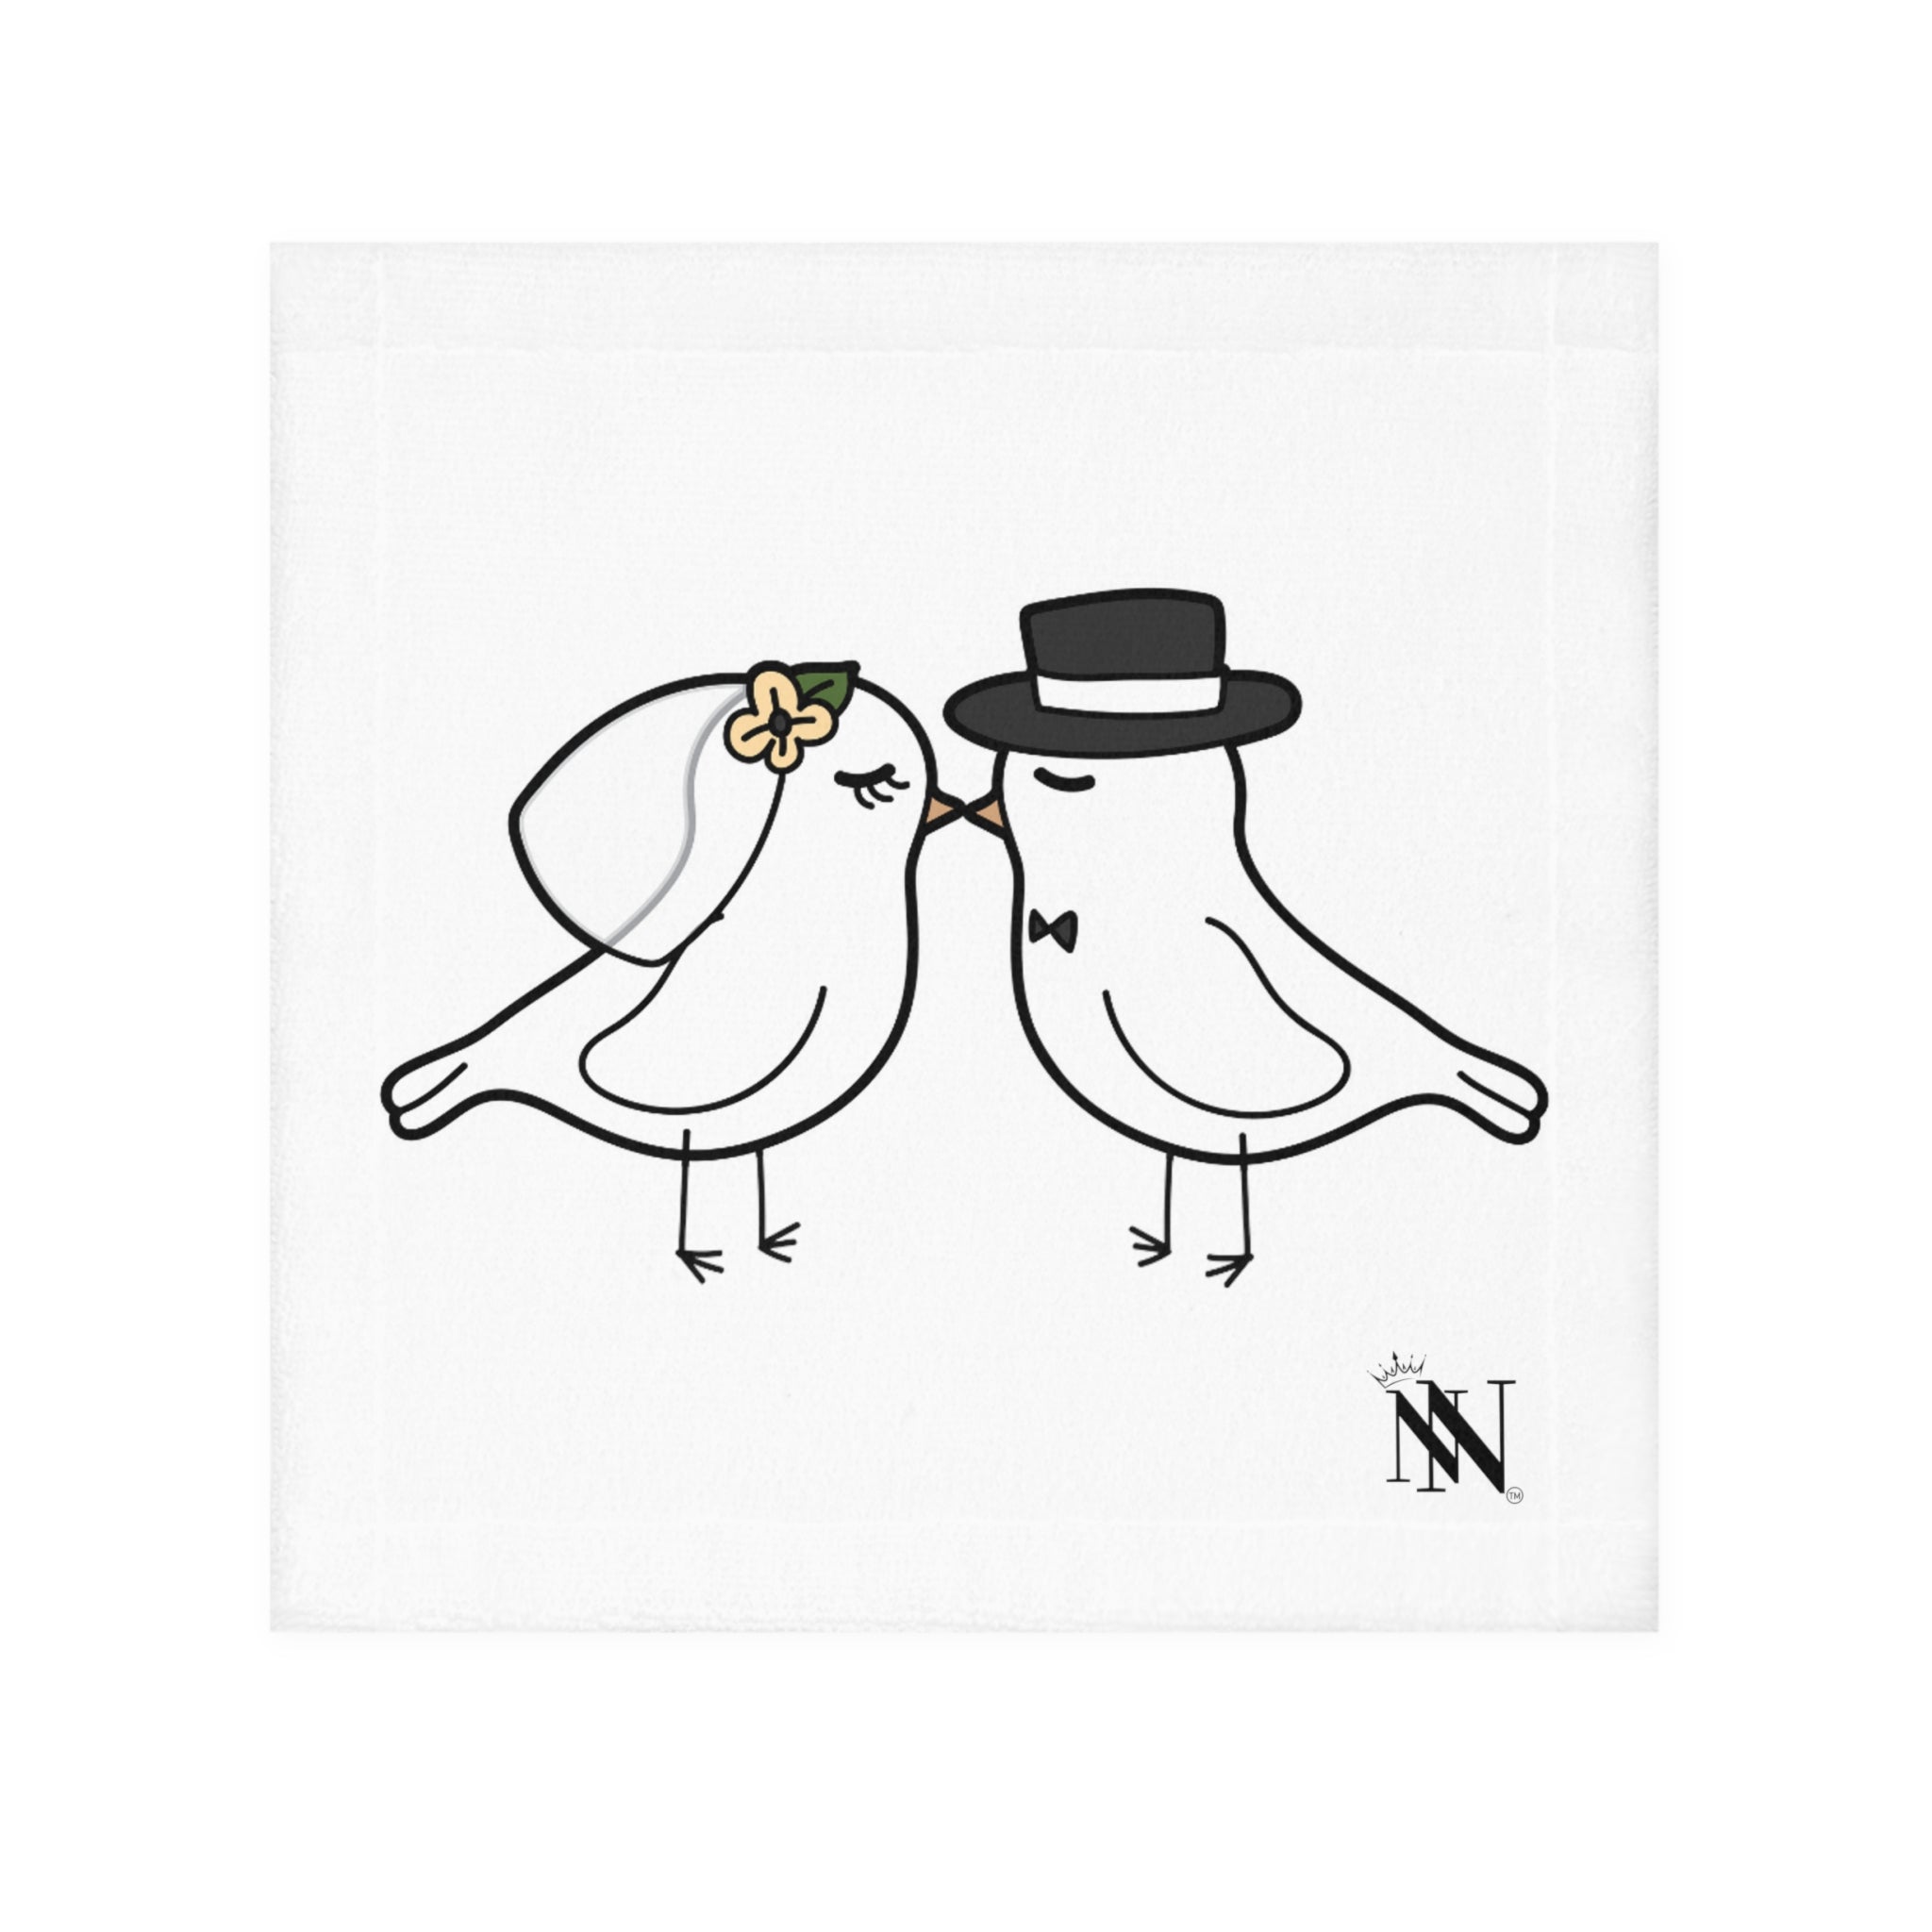 Lils' Love Birds | Gifts for Boyfriend, Funny Towel Romantic Gift for Wedding Couple Fiance First Year Anniversary Valentines, Party Gag Gifts, Joke Humor Cloth for Husband Men BF NECTAR NAPKINS